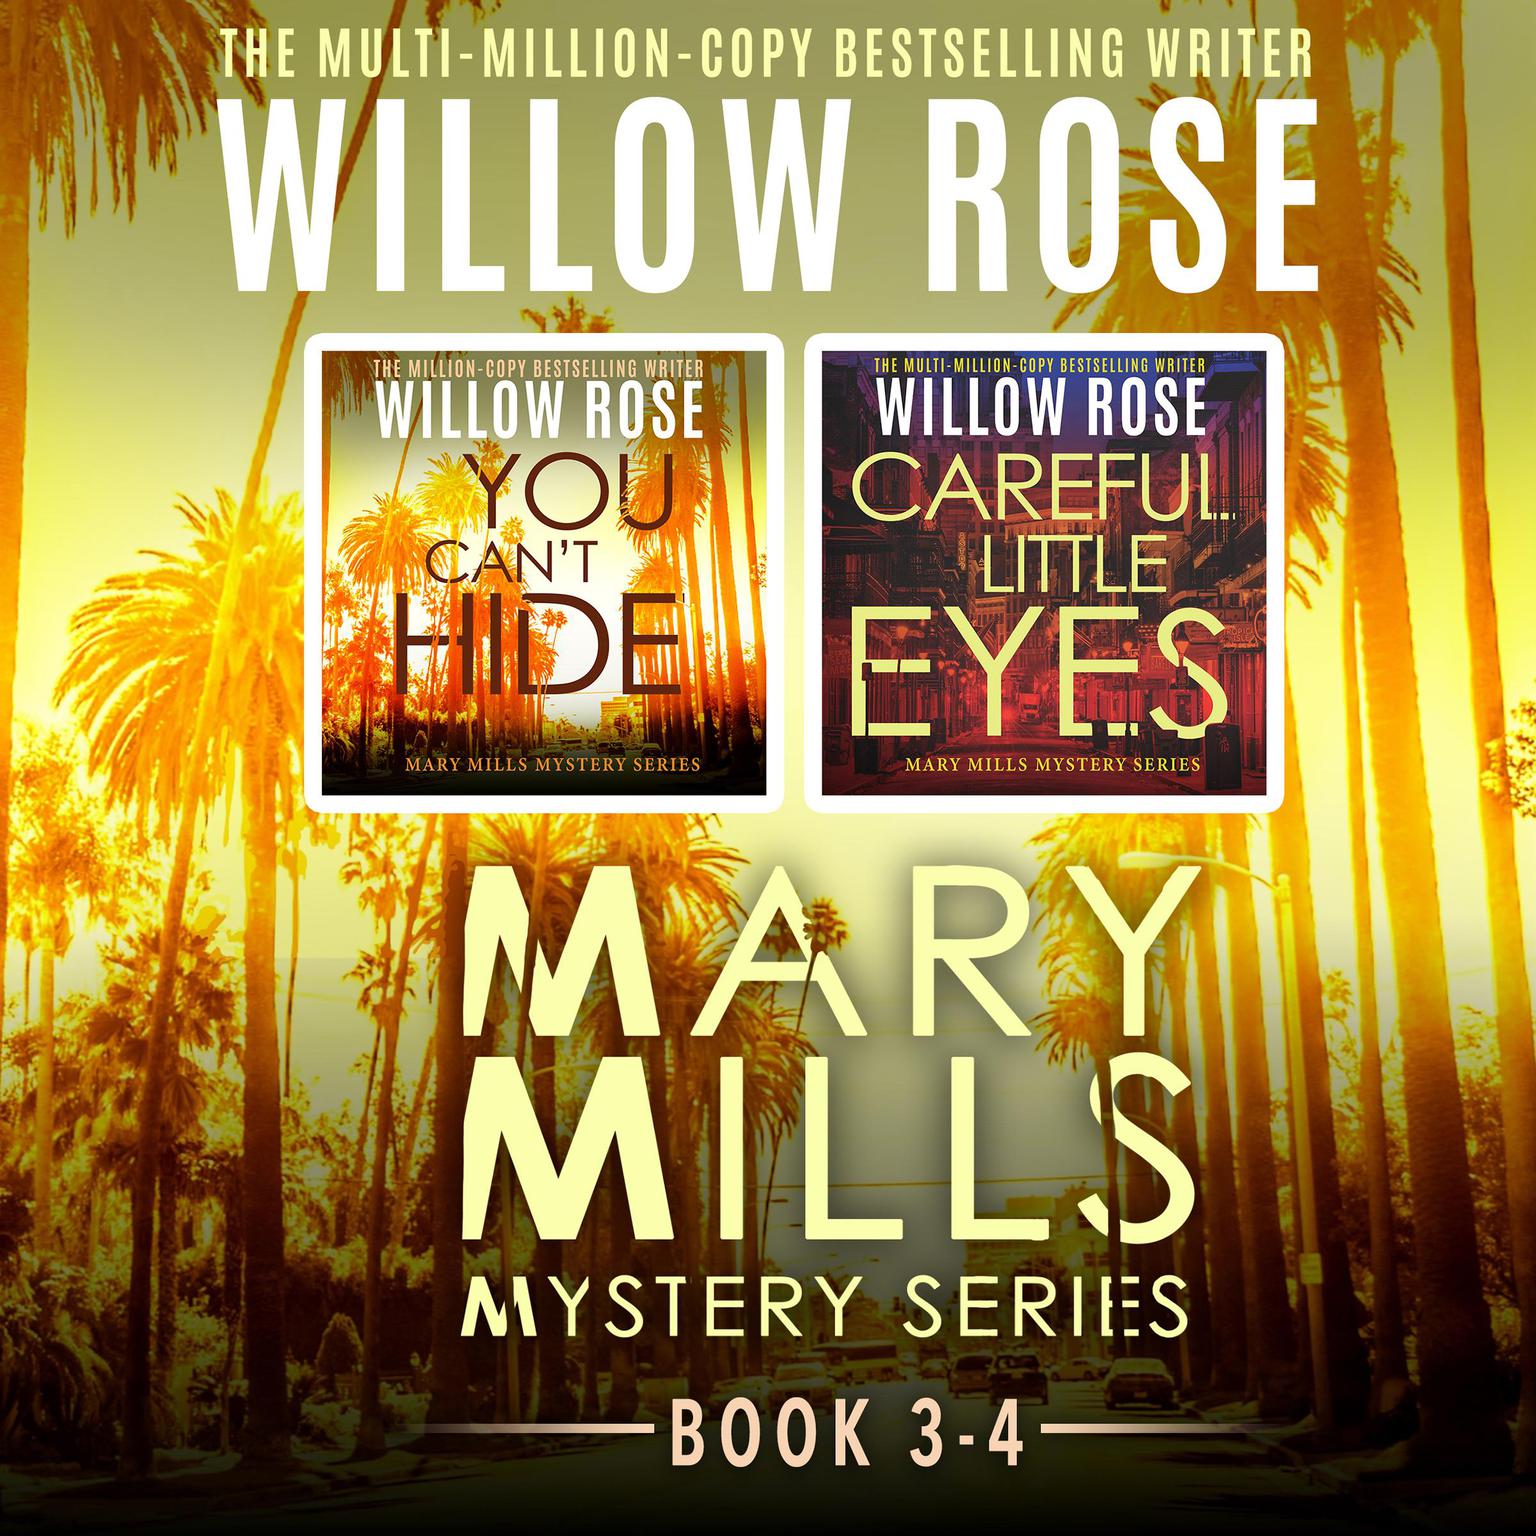 Mary Mills Mystery Series: Vol 3-4 Audiobook, by Willow Rose